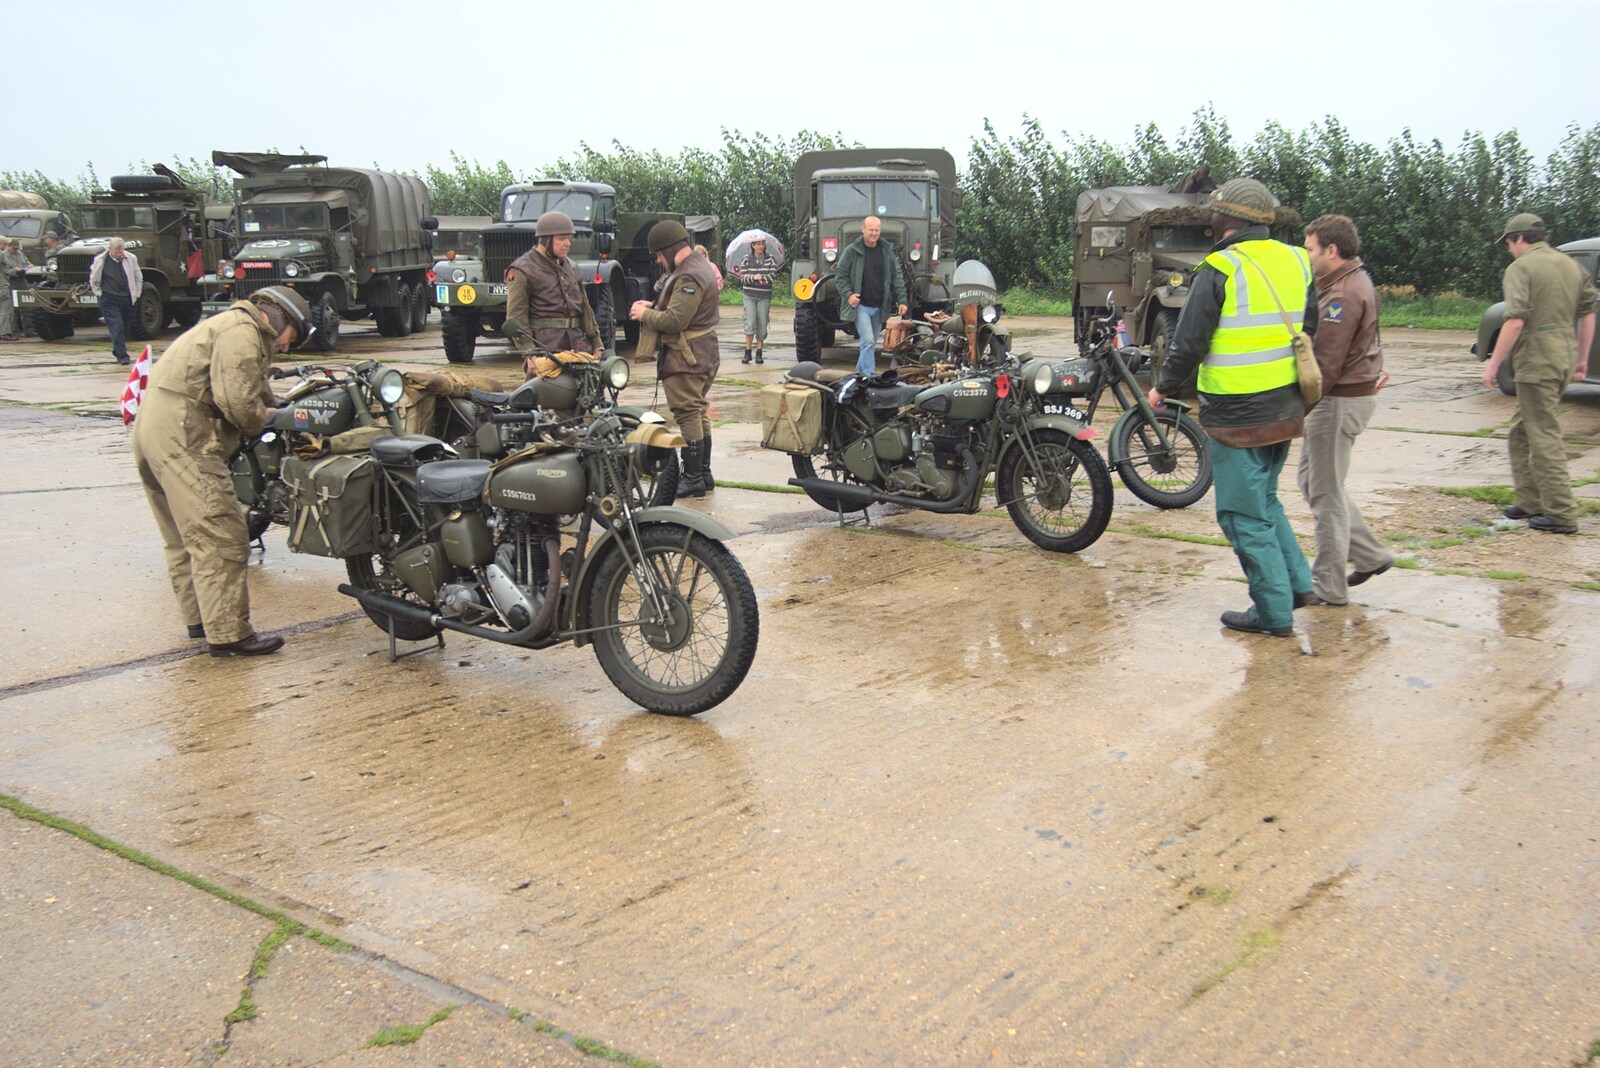 More vintage WWII motorobikes from Clive's Military Vehicle Convoy, Brome Aerodrome, Suffolk - 16th July 2011